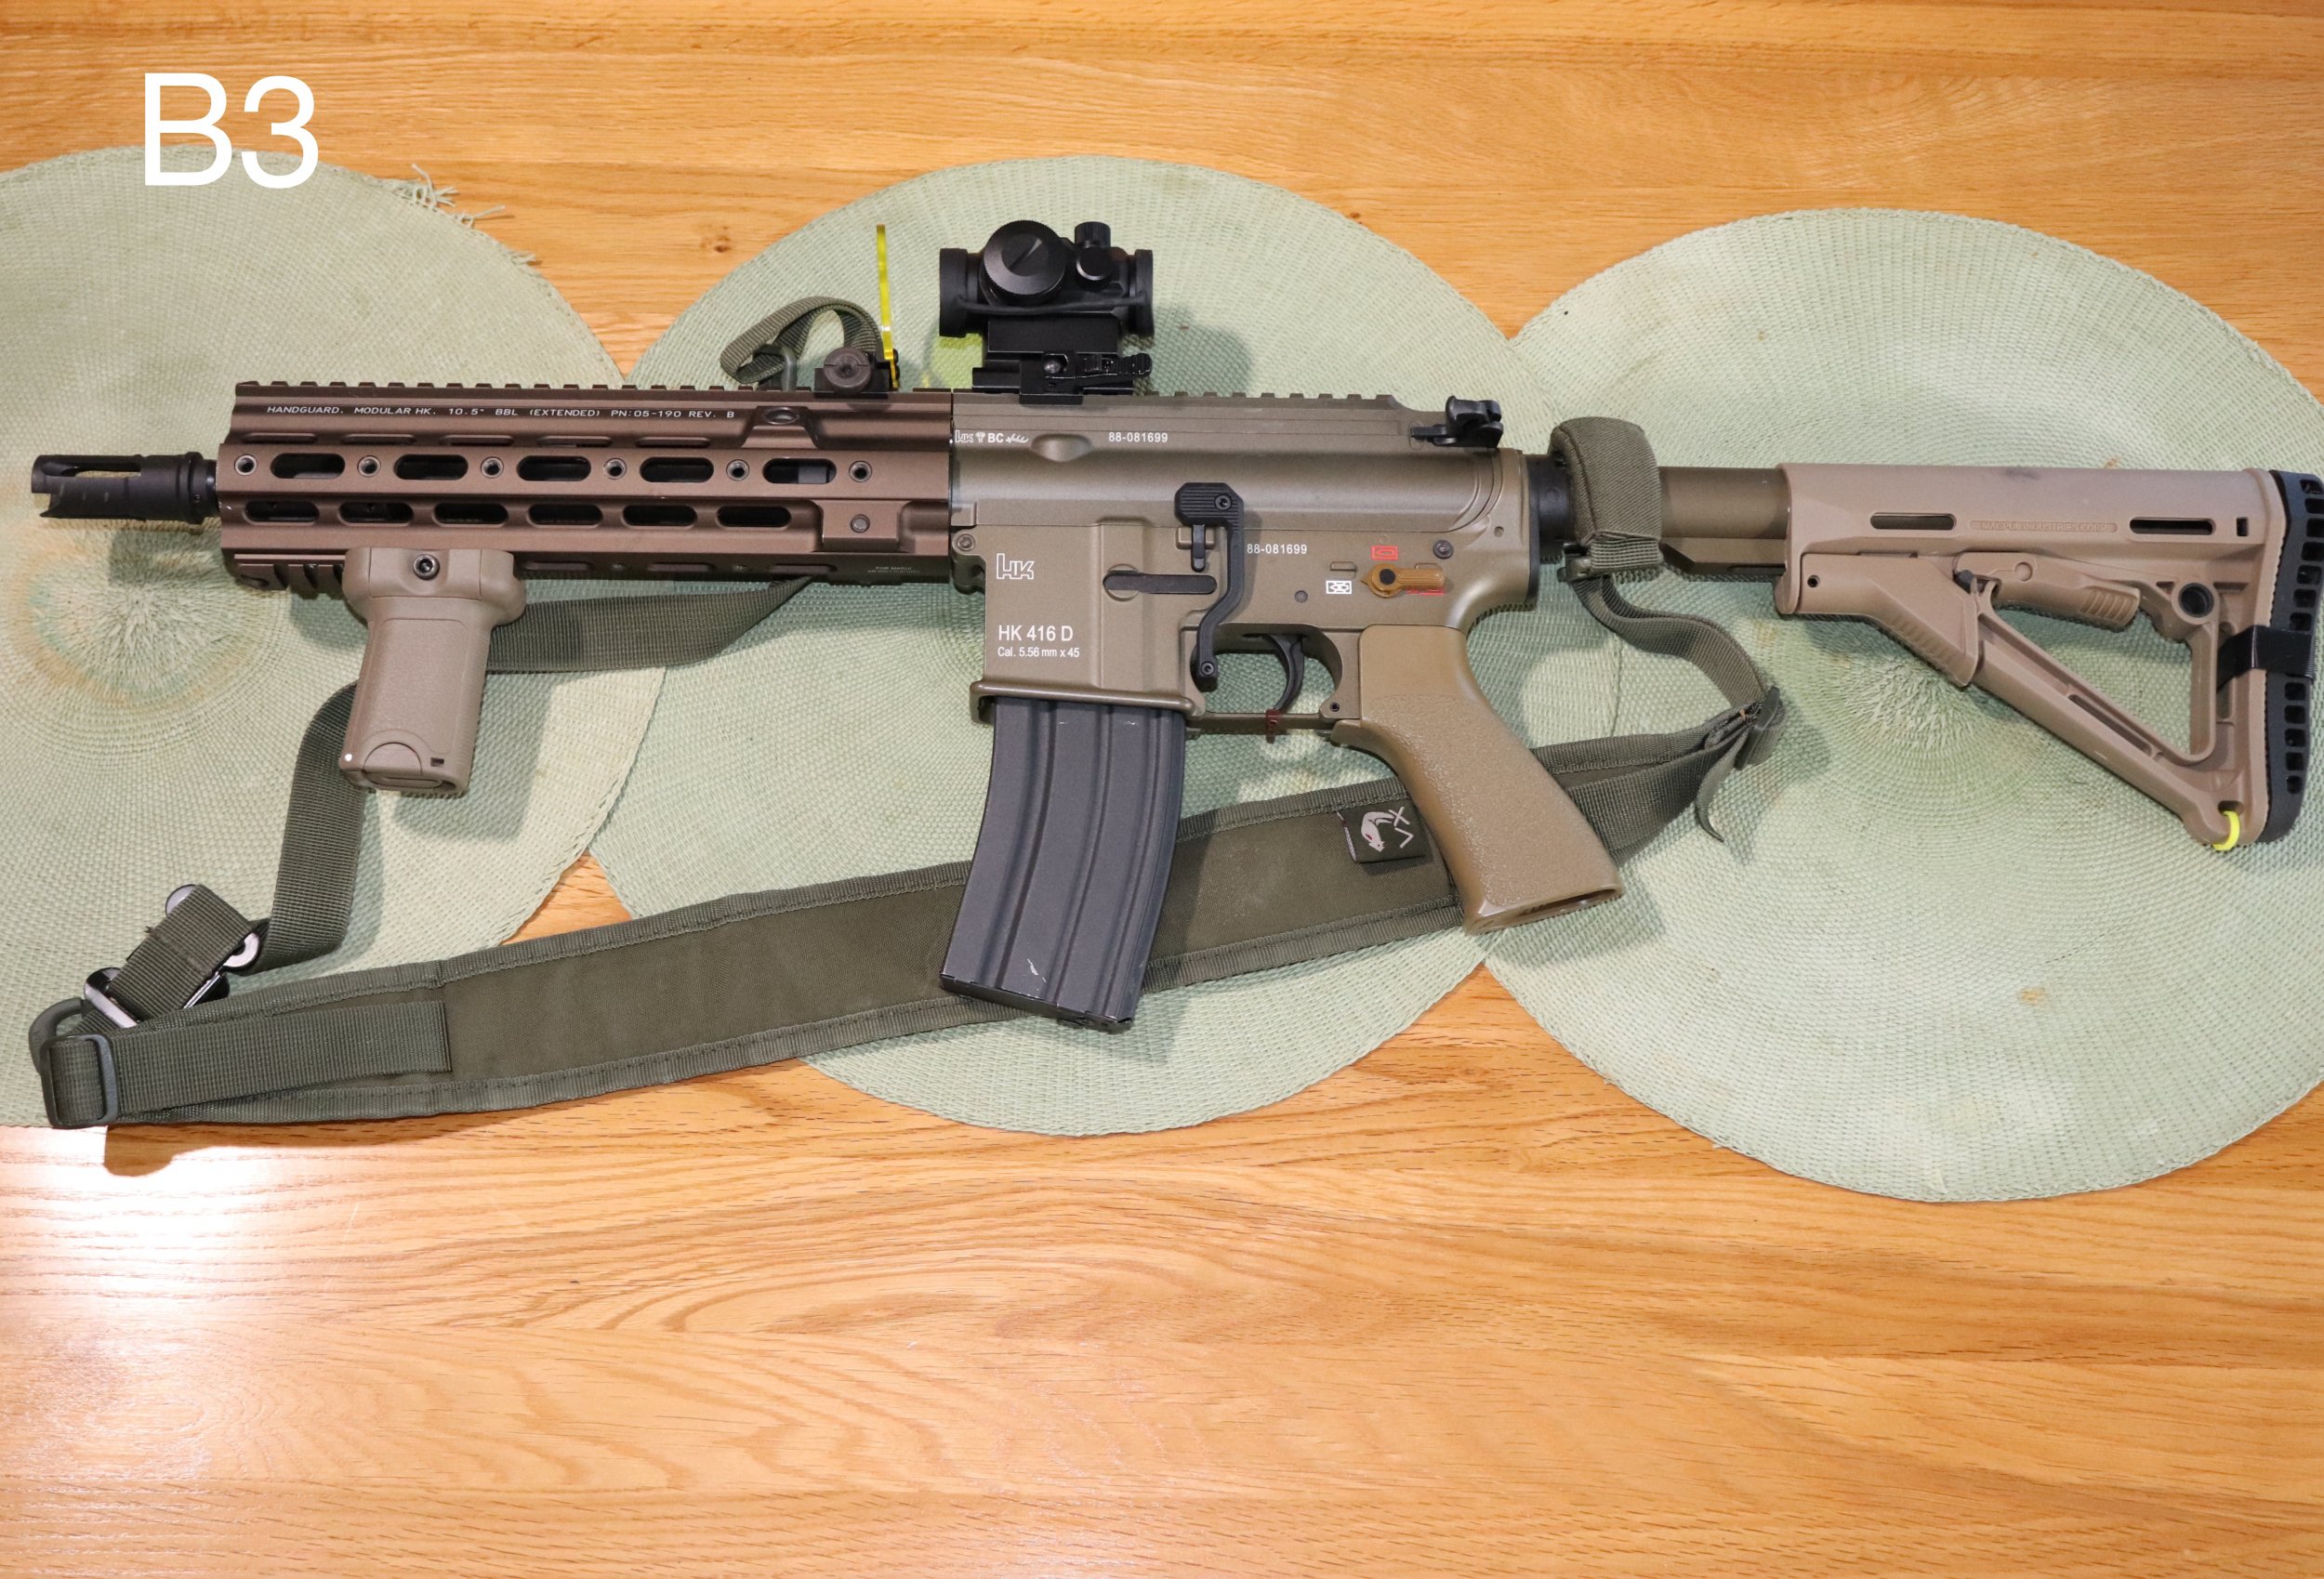 TM - HK416 Delta NGRS for sale (nearly new cond.) - Electric Rifles